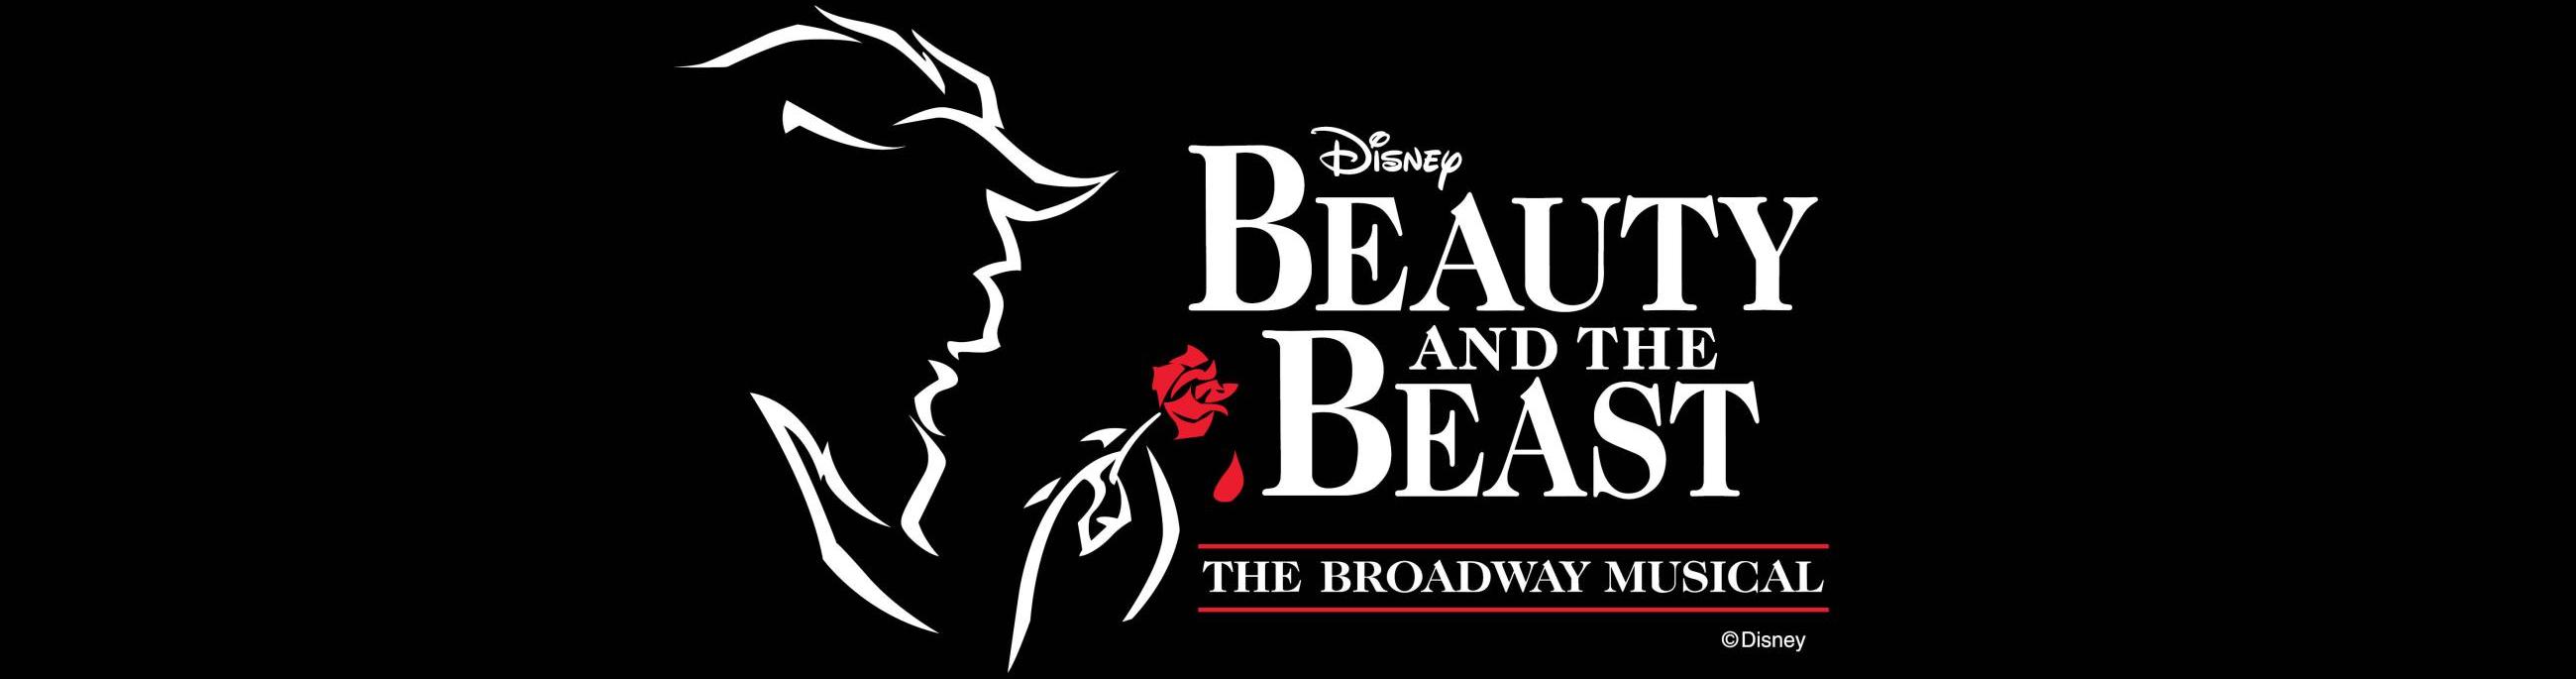 Cast Announced for Disney's Beauty & the Beast Live in Concert ...